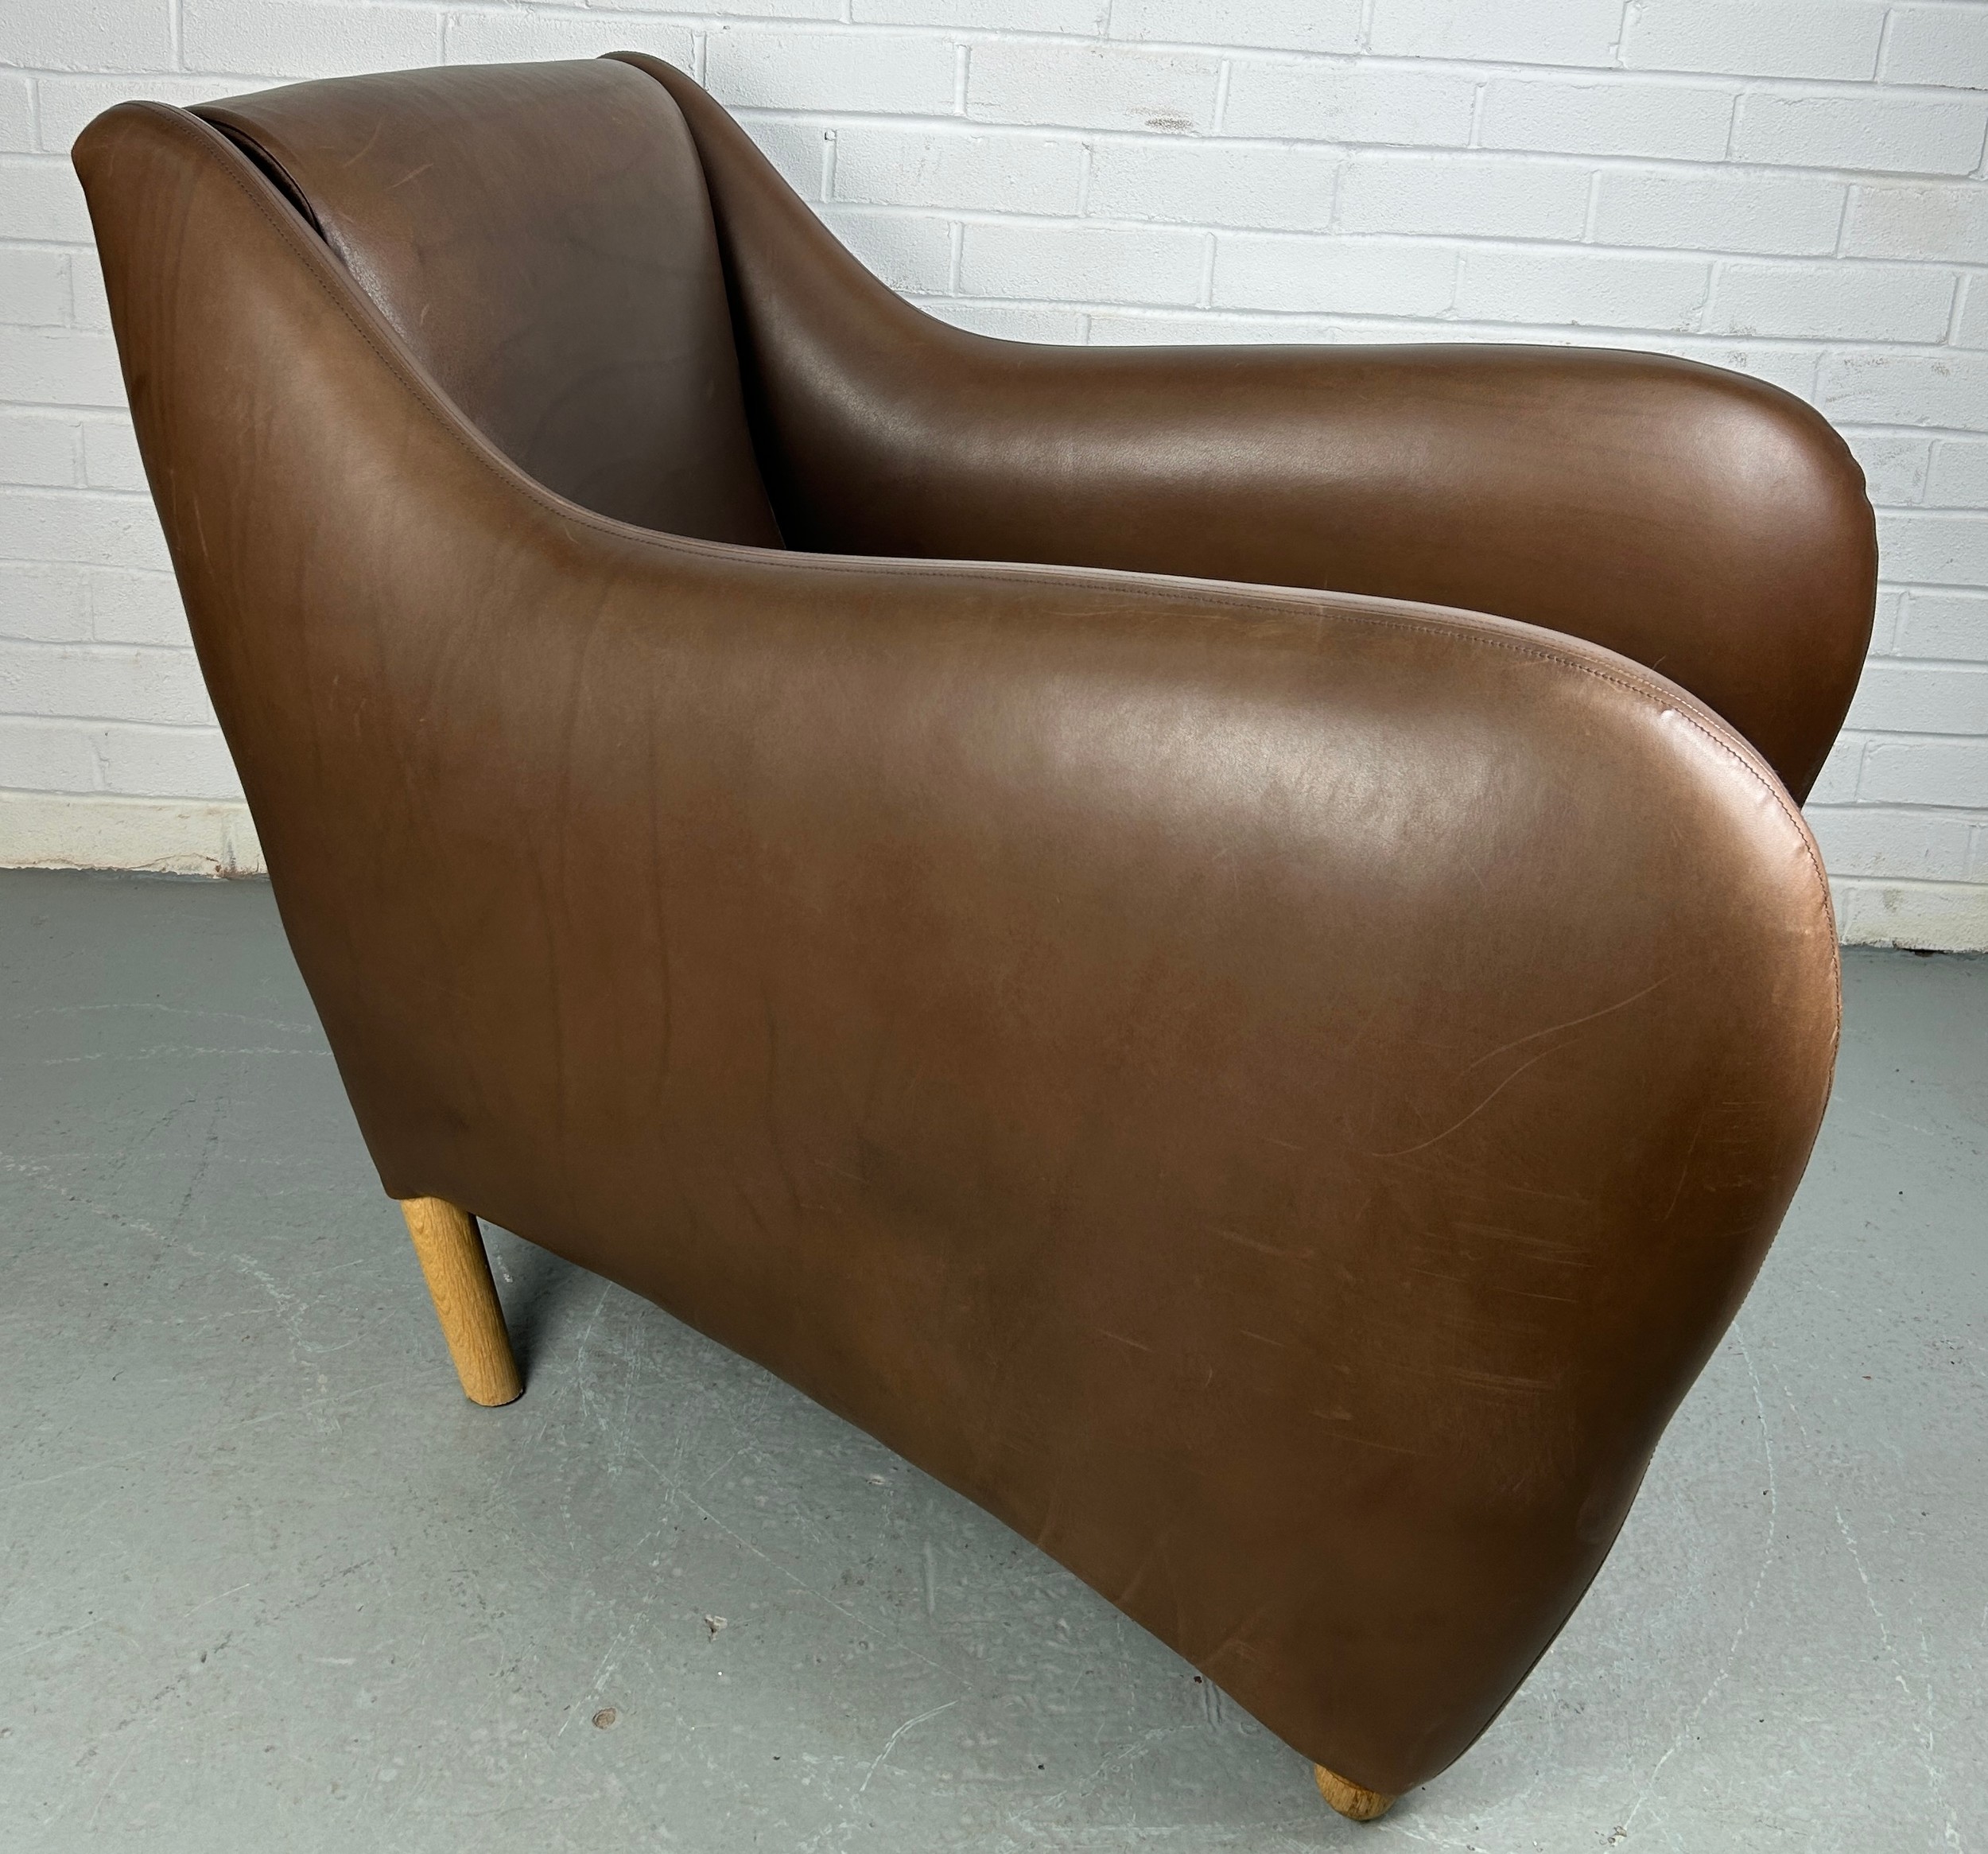 AN SCP BALZAC BROWN LEATHER ARMCHAIR AND FOOTSTOOL BY MATTHEW HILTON, Retailed by the Conran Shop. - Image 5 of 6